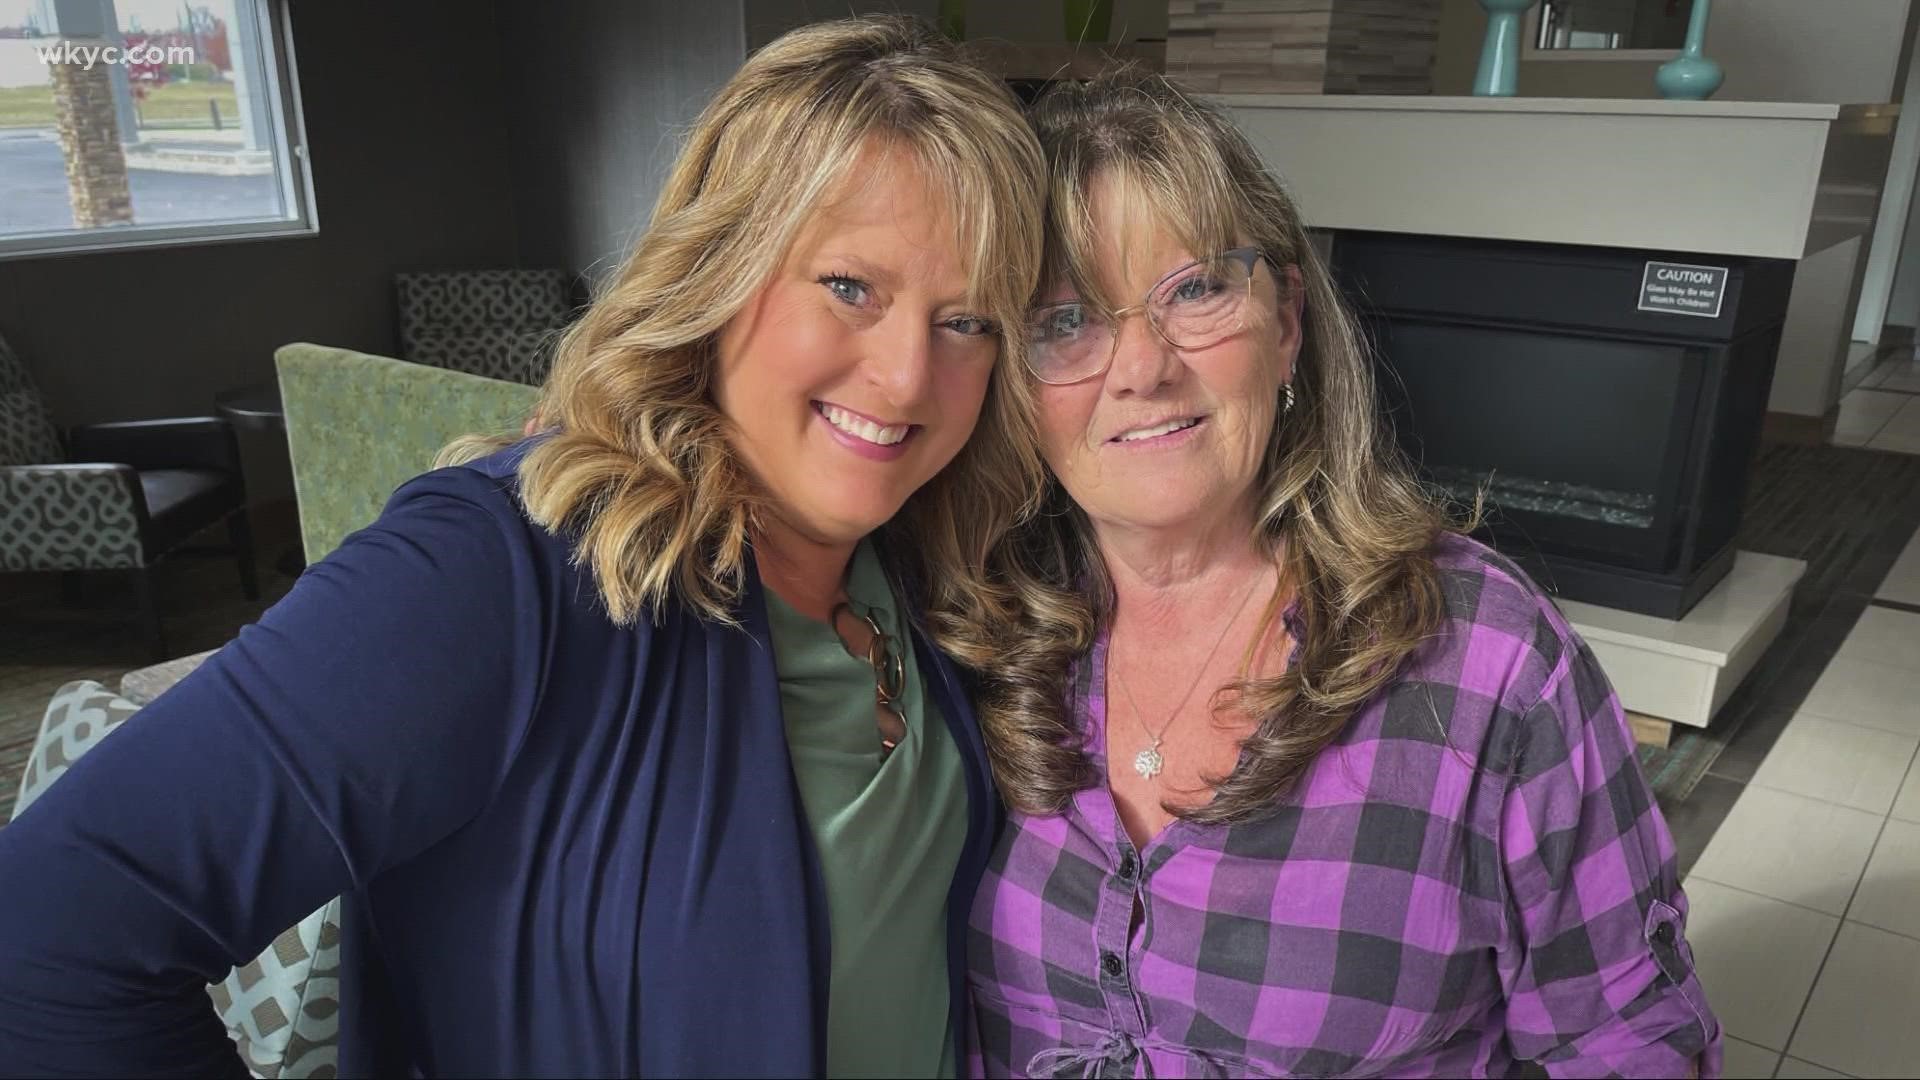 Our very own Monica Robins met with a patient who underwent the same surgery she's having to remove more of her brain tumor.